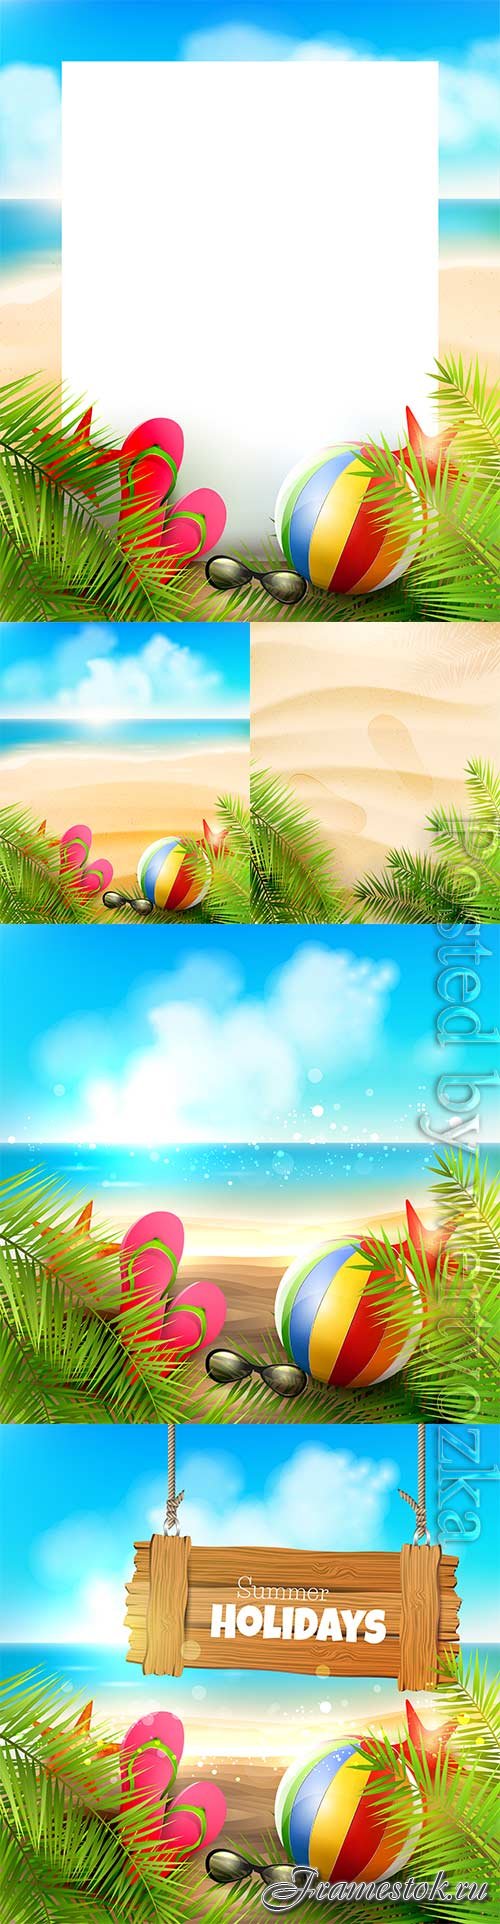 Summer vacation, sea, palm trees, cocktails in vector vol 8